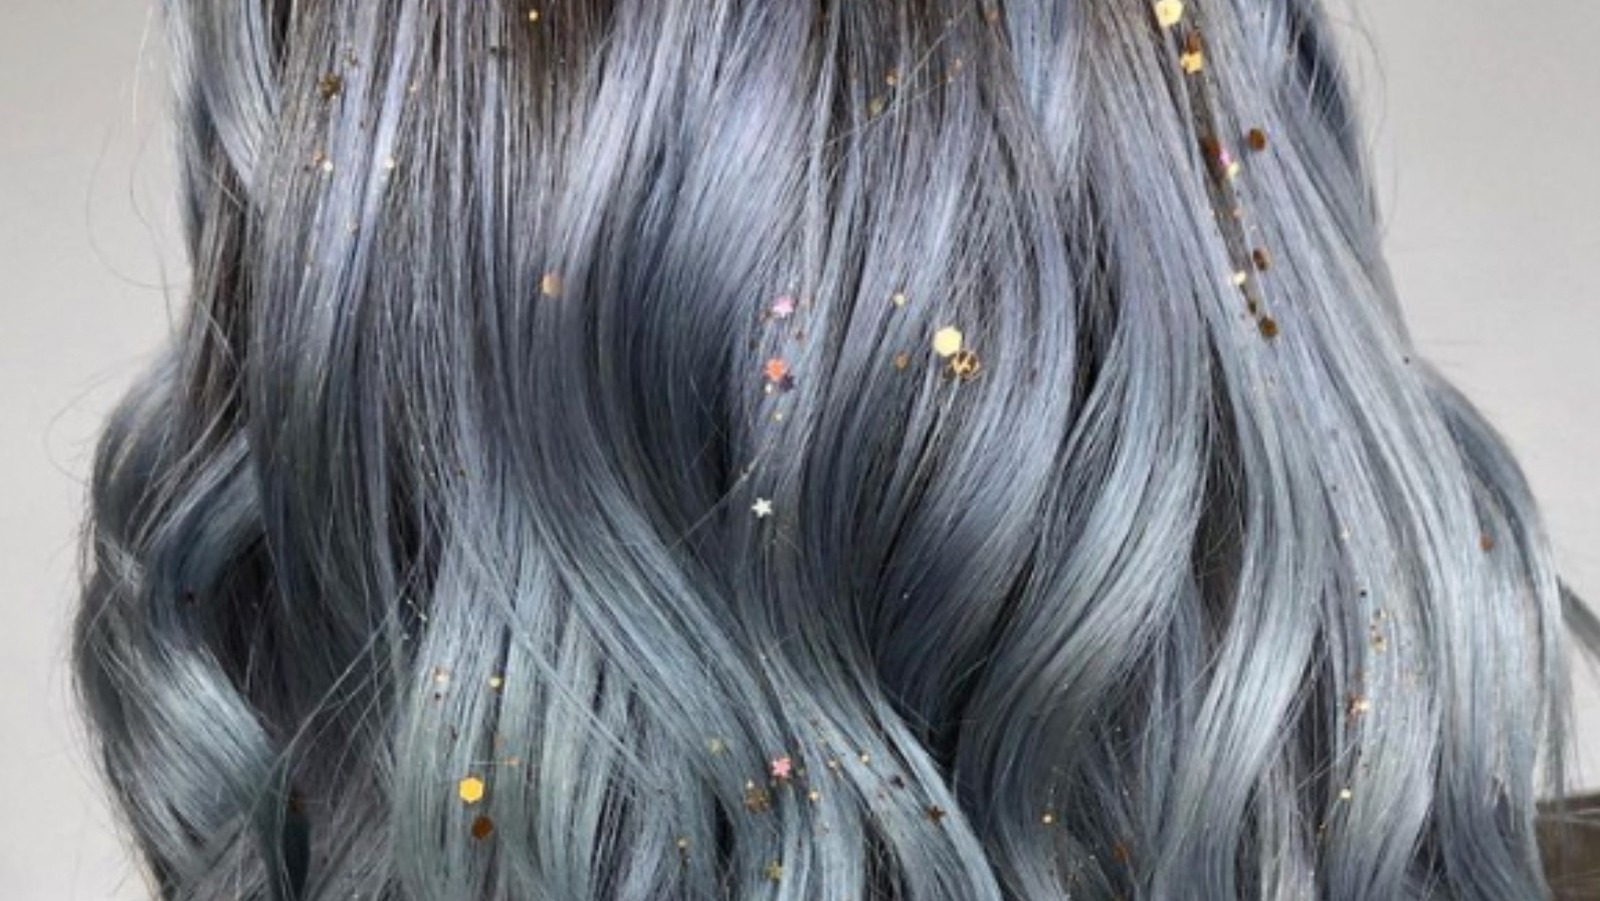 Dazzling Hair Glitter Ideas That You'll Want To Try Out In Real Life